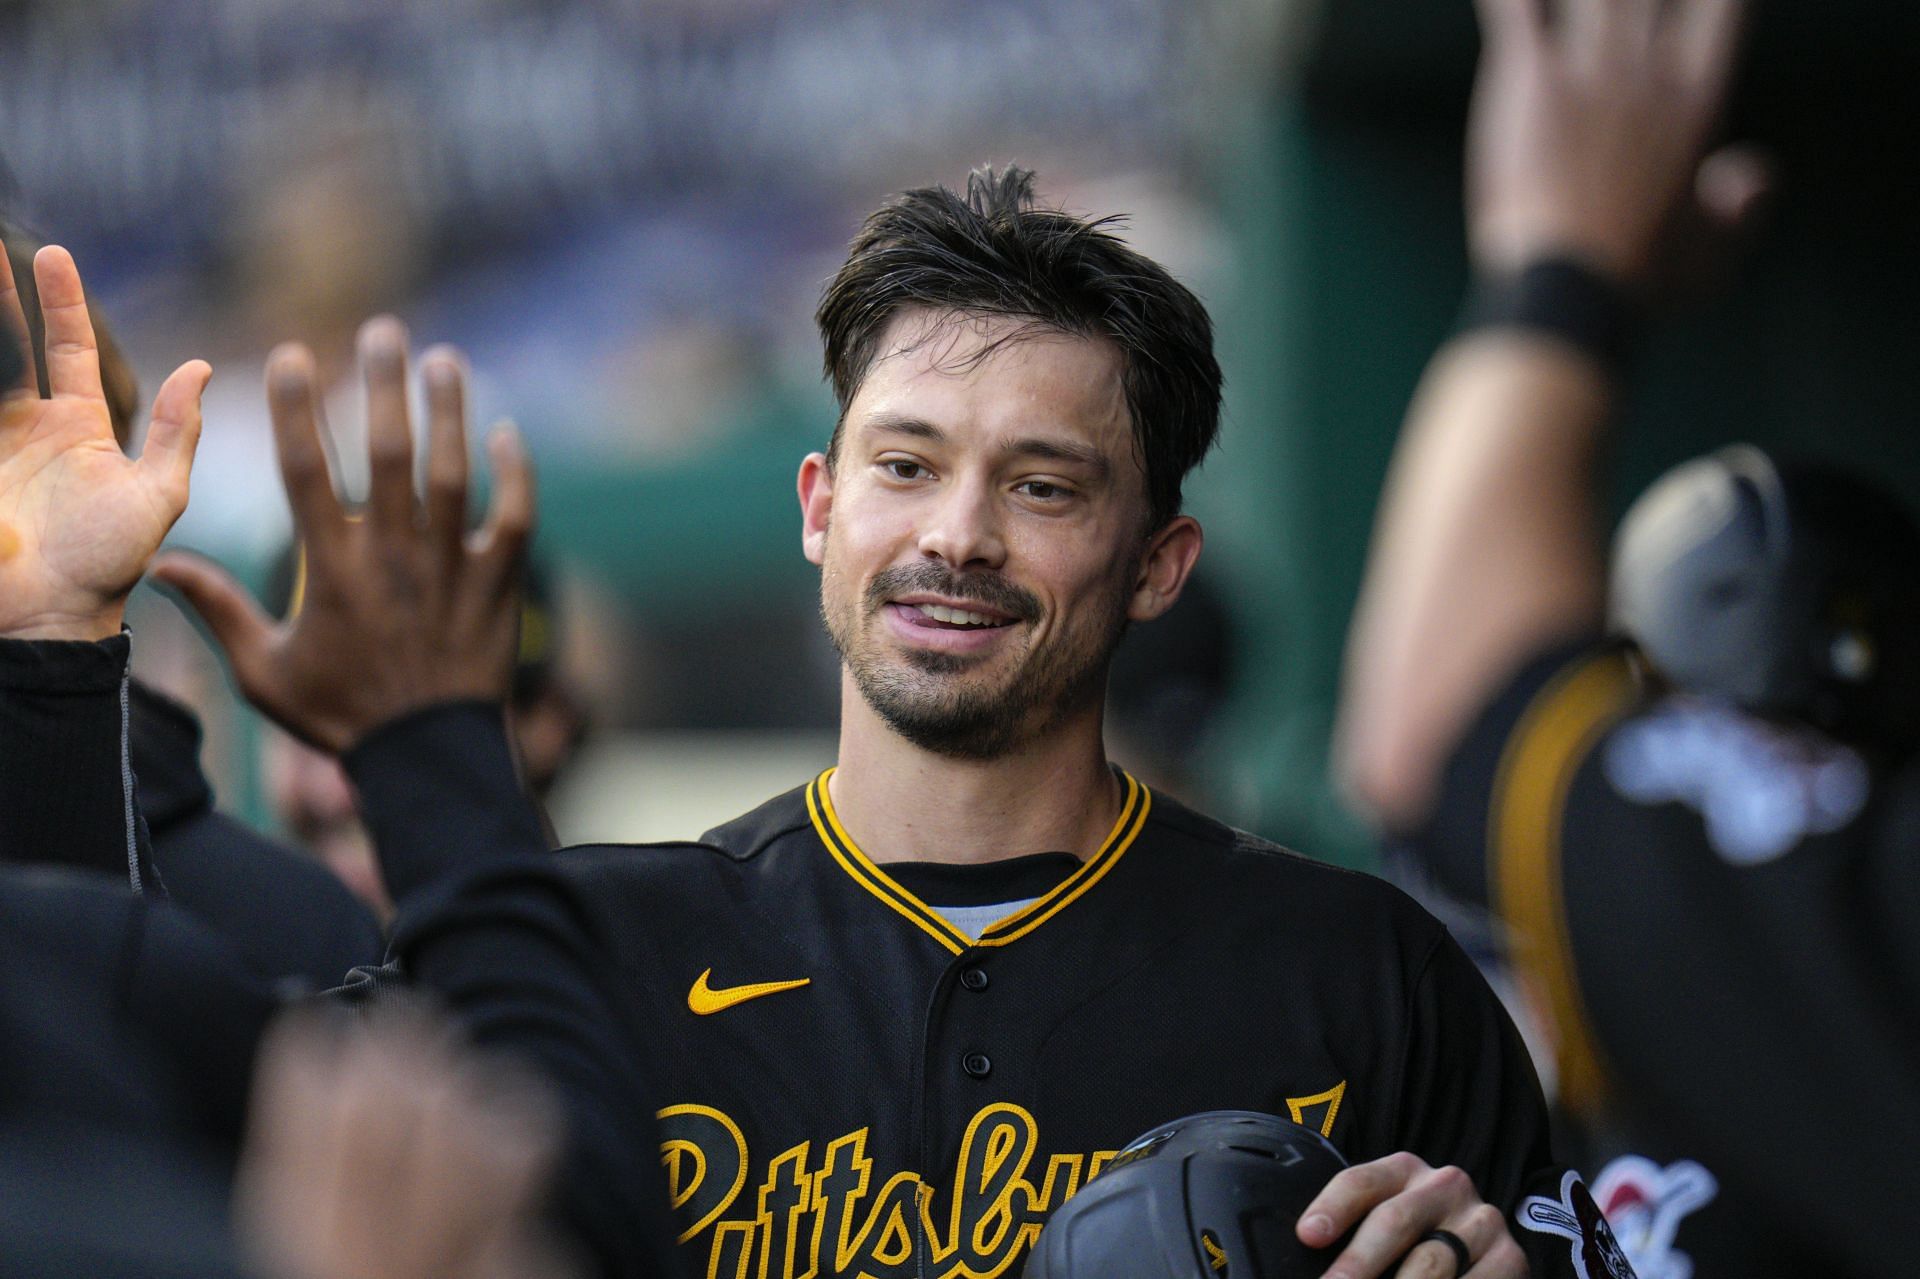 MLB on X: Last night, the @Pirates became the first NL team to 20